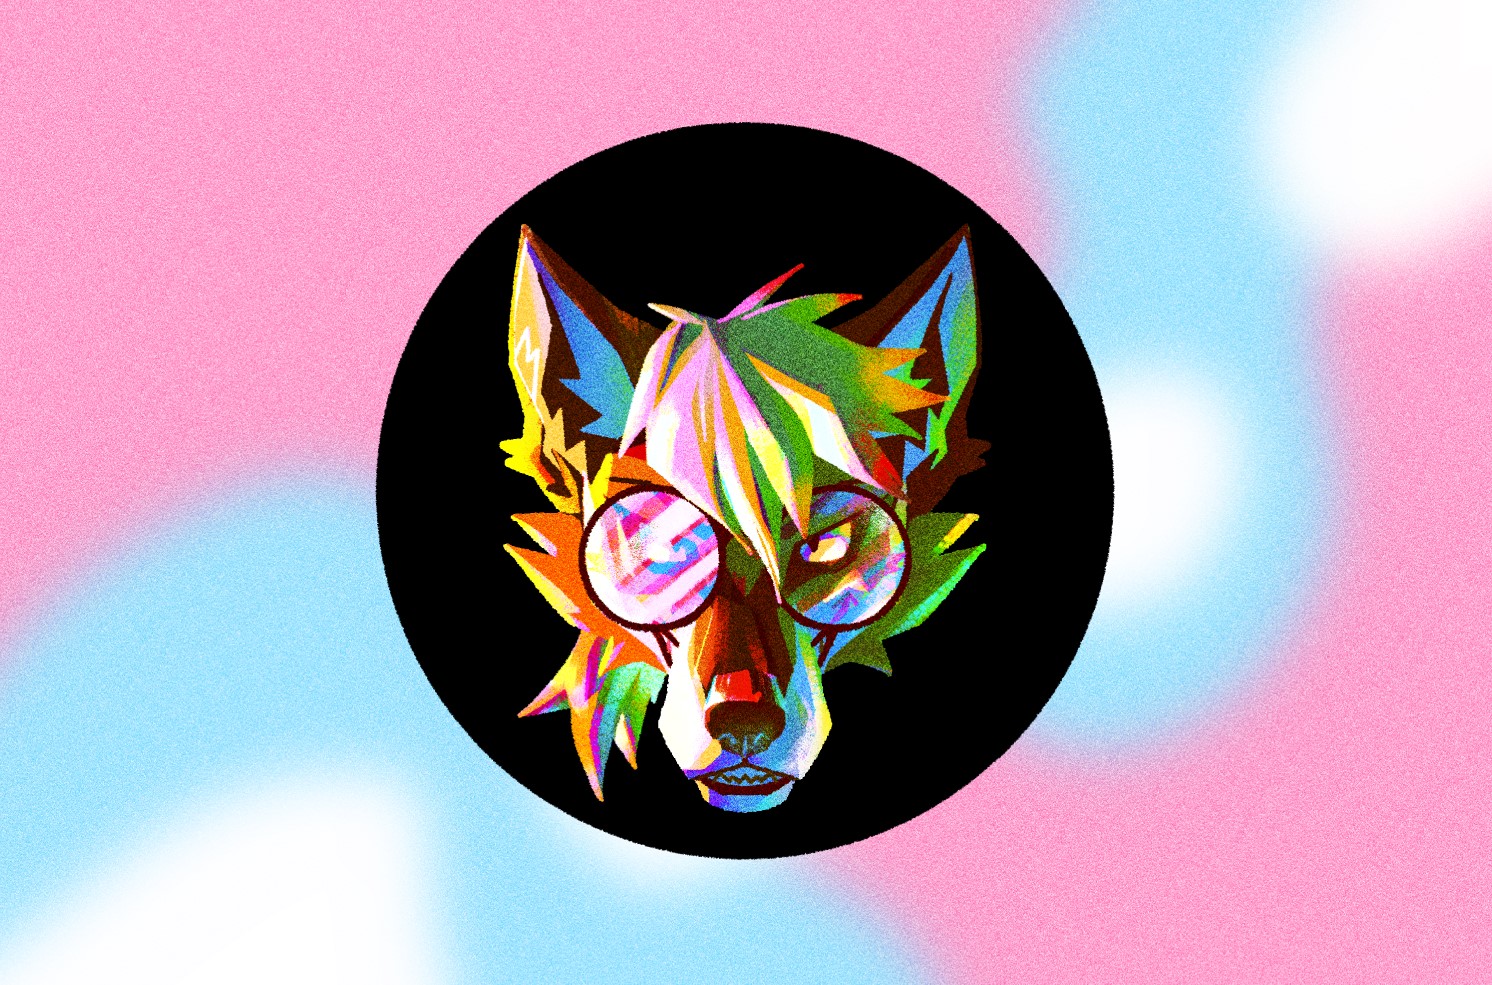 A digital painting, featuring a front facing portrait of the head of a fox character framed in a black circle, imposed on an abstract background. She sports a fringe and large round glasses. The piece is ablaze with vibrant, rainbow colors, and a transgender pride flag gleams off the lenses of her glasses. Her expression is sure and smug.